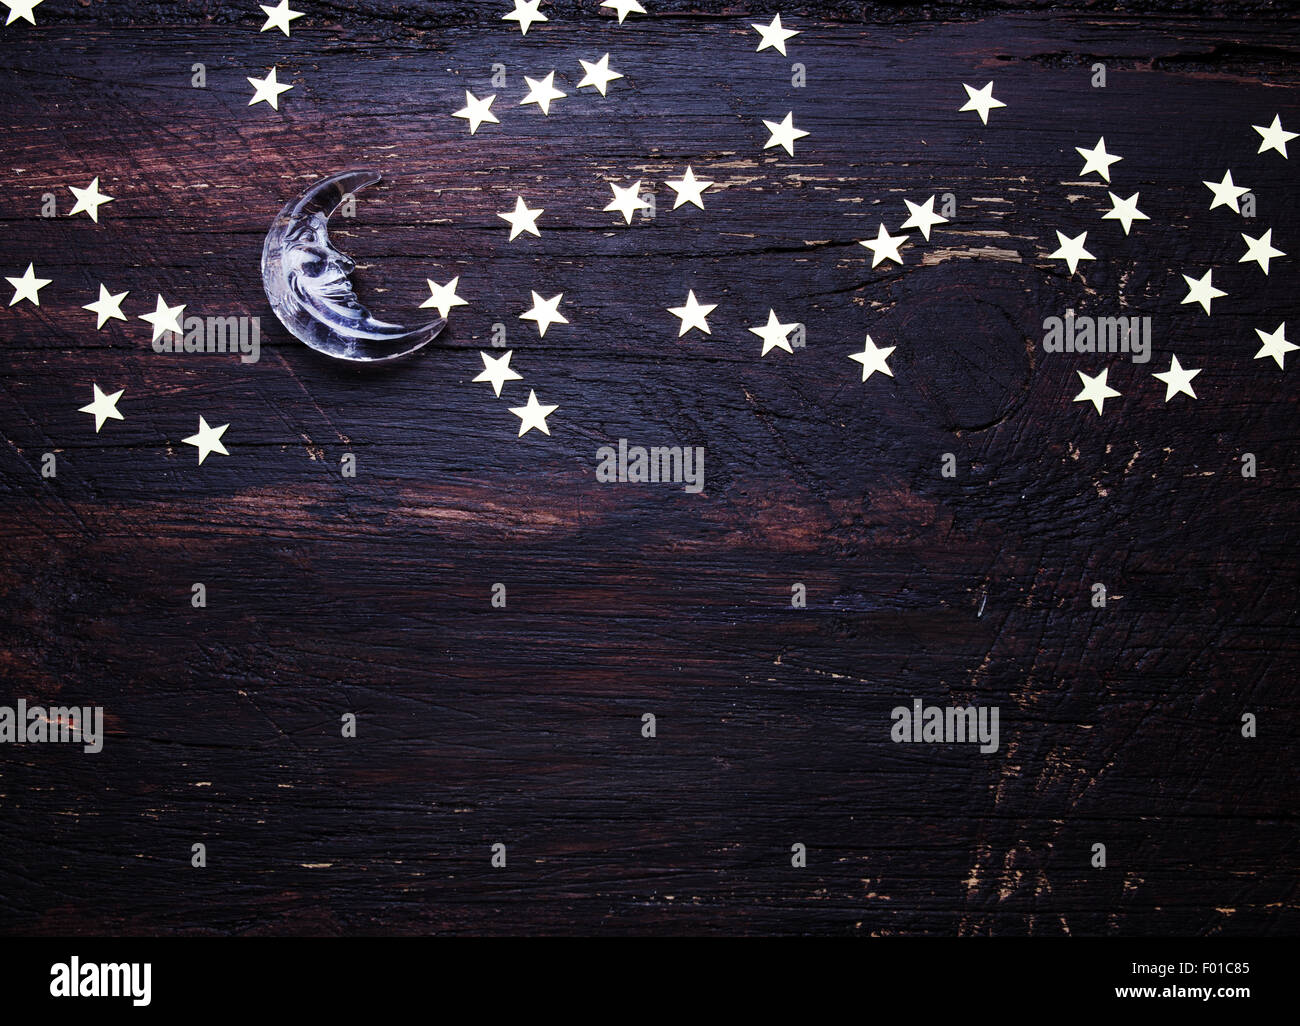 Glitter golden stars and glass moon on grunge wood background. Black and white photo Stock Photo